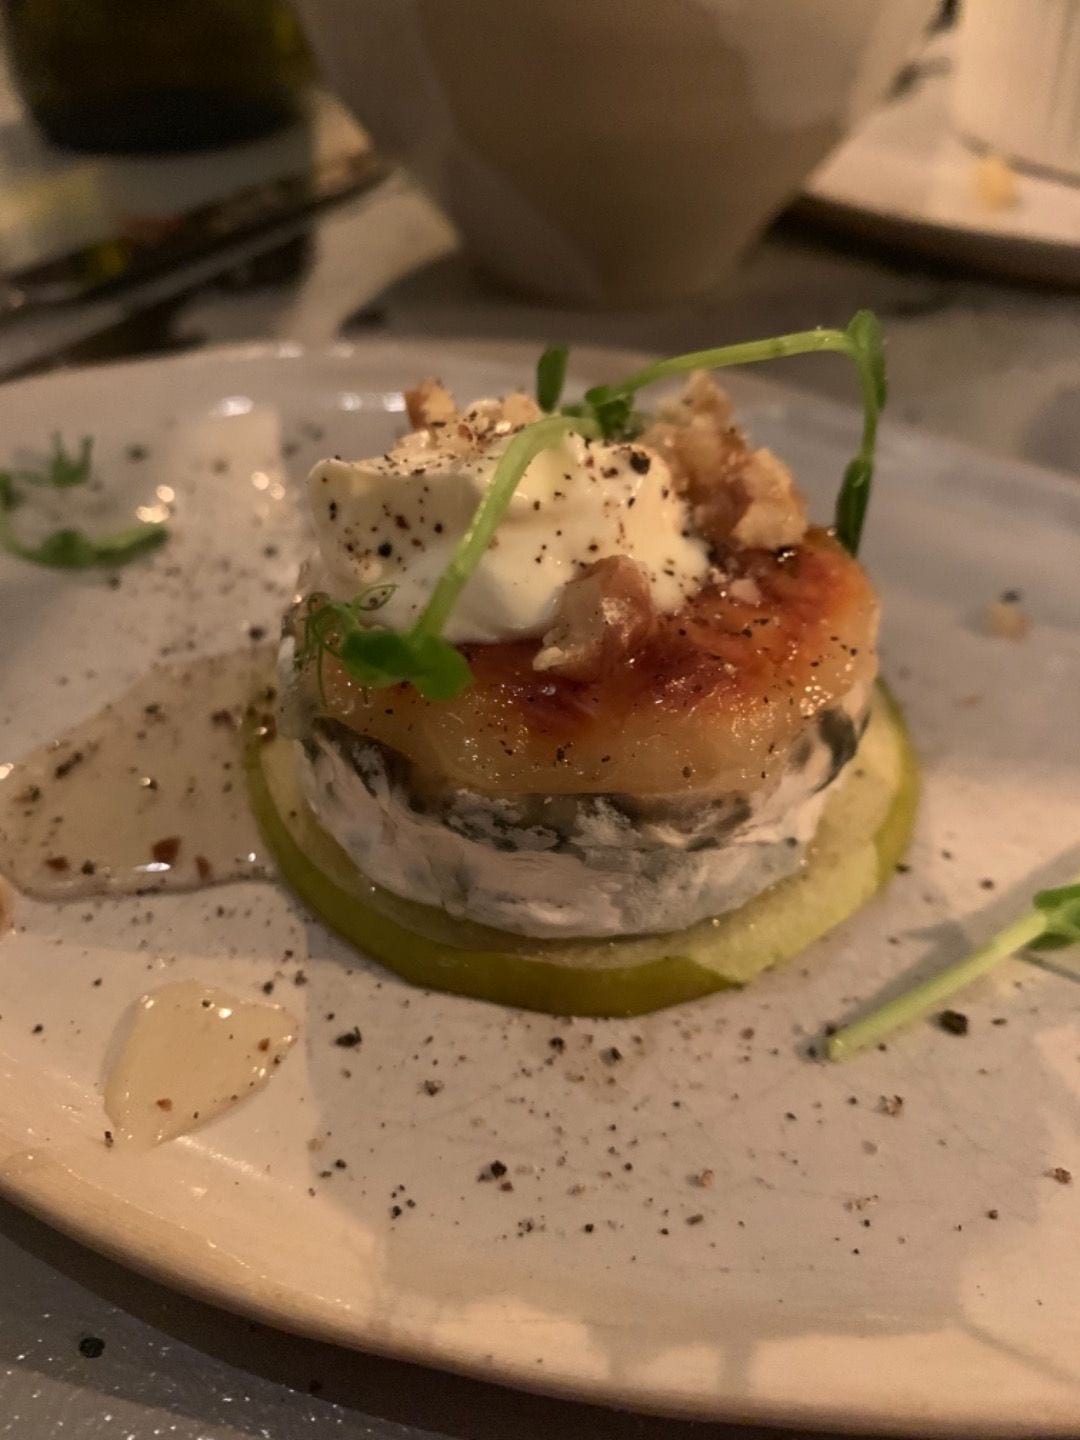 Chèvre med tryffelhonung – Photo from Delphine & Edouard by Malin L. (22/09/2019)